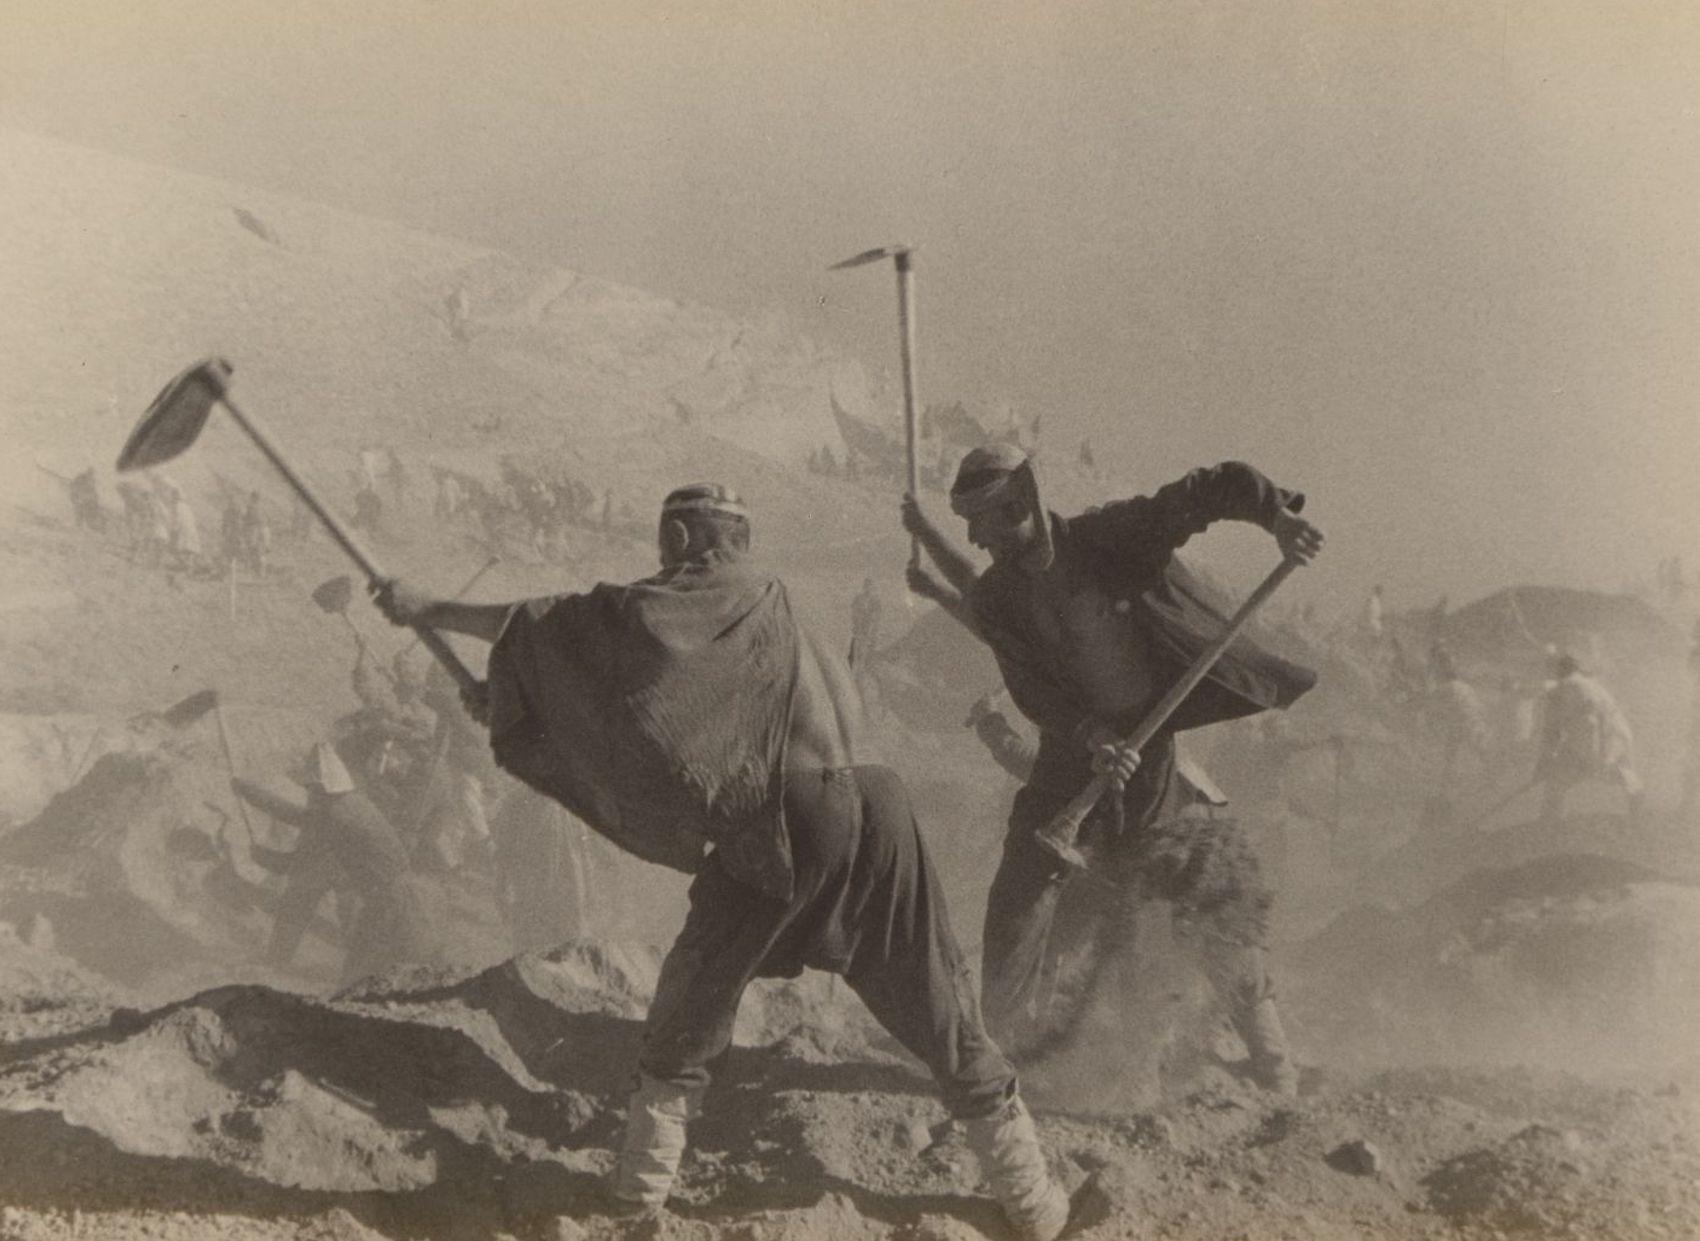 Two workers striking vigorously with their shovels in the foreground; others are visible in the background, partly obscured by the dust.